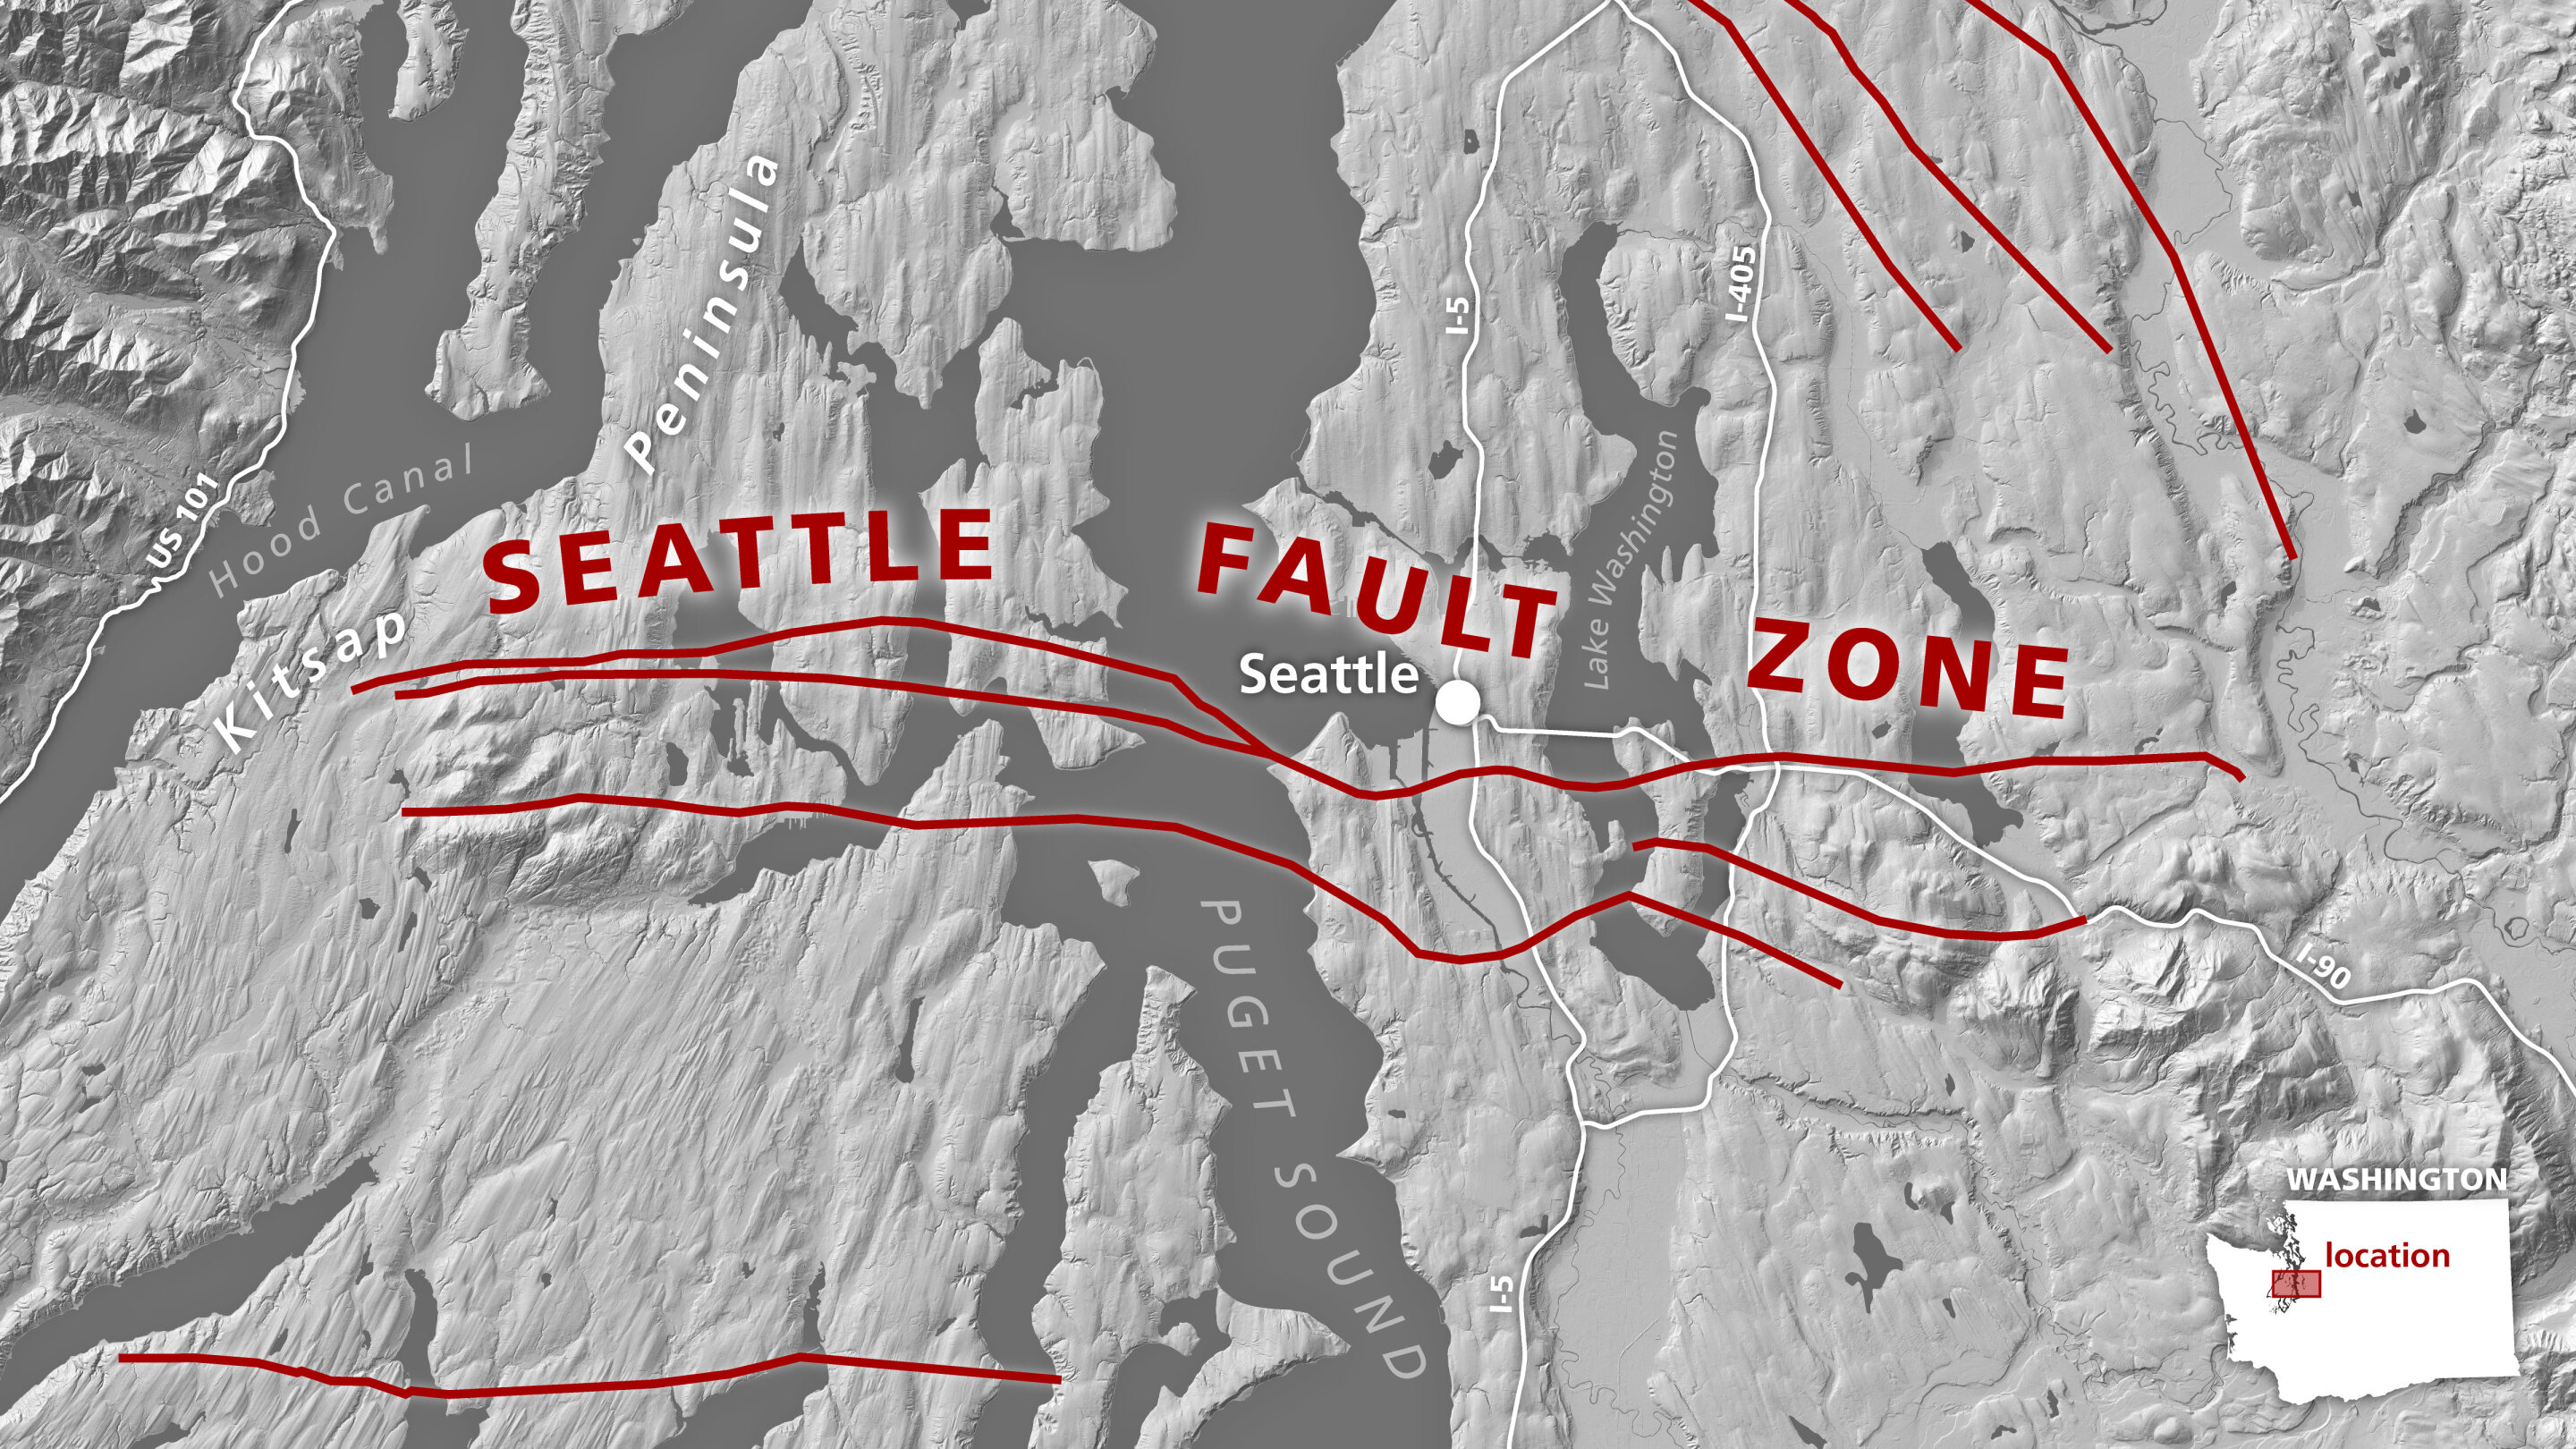 A new origin story for deadly Seattle fault